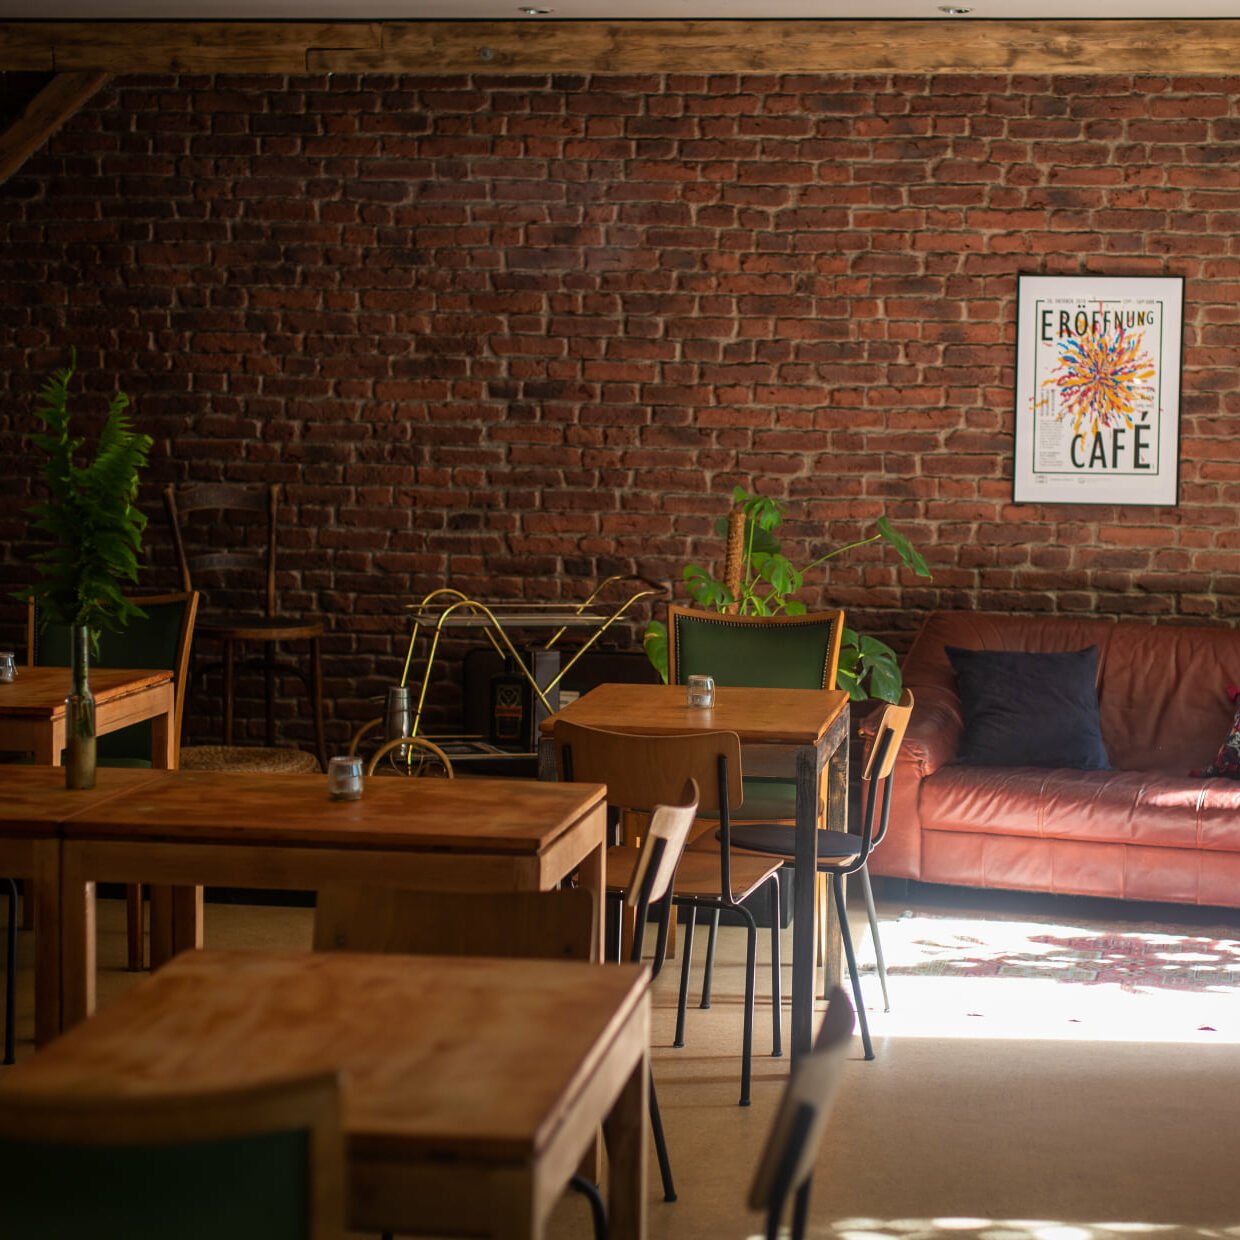 Photo showing a cafe scene with three tables, two wooden, one green chair, and a sofa in the back right. In the left corner is a small stage before a red brick wall.